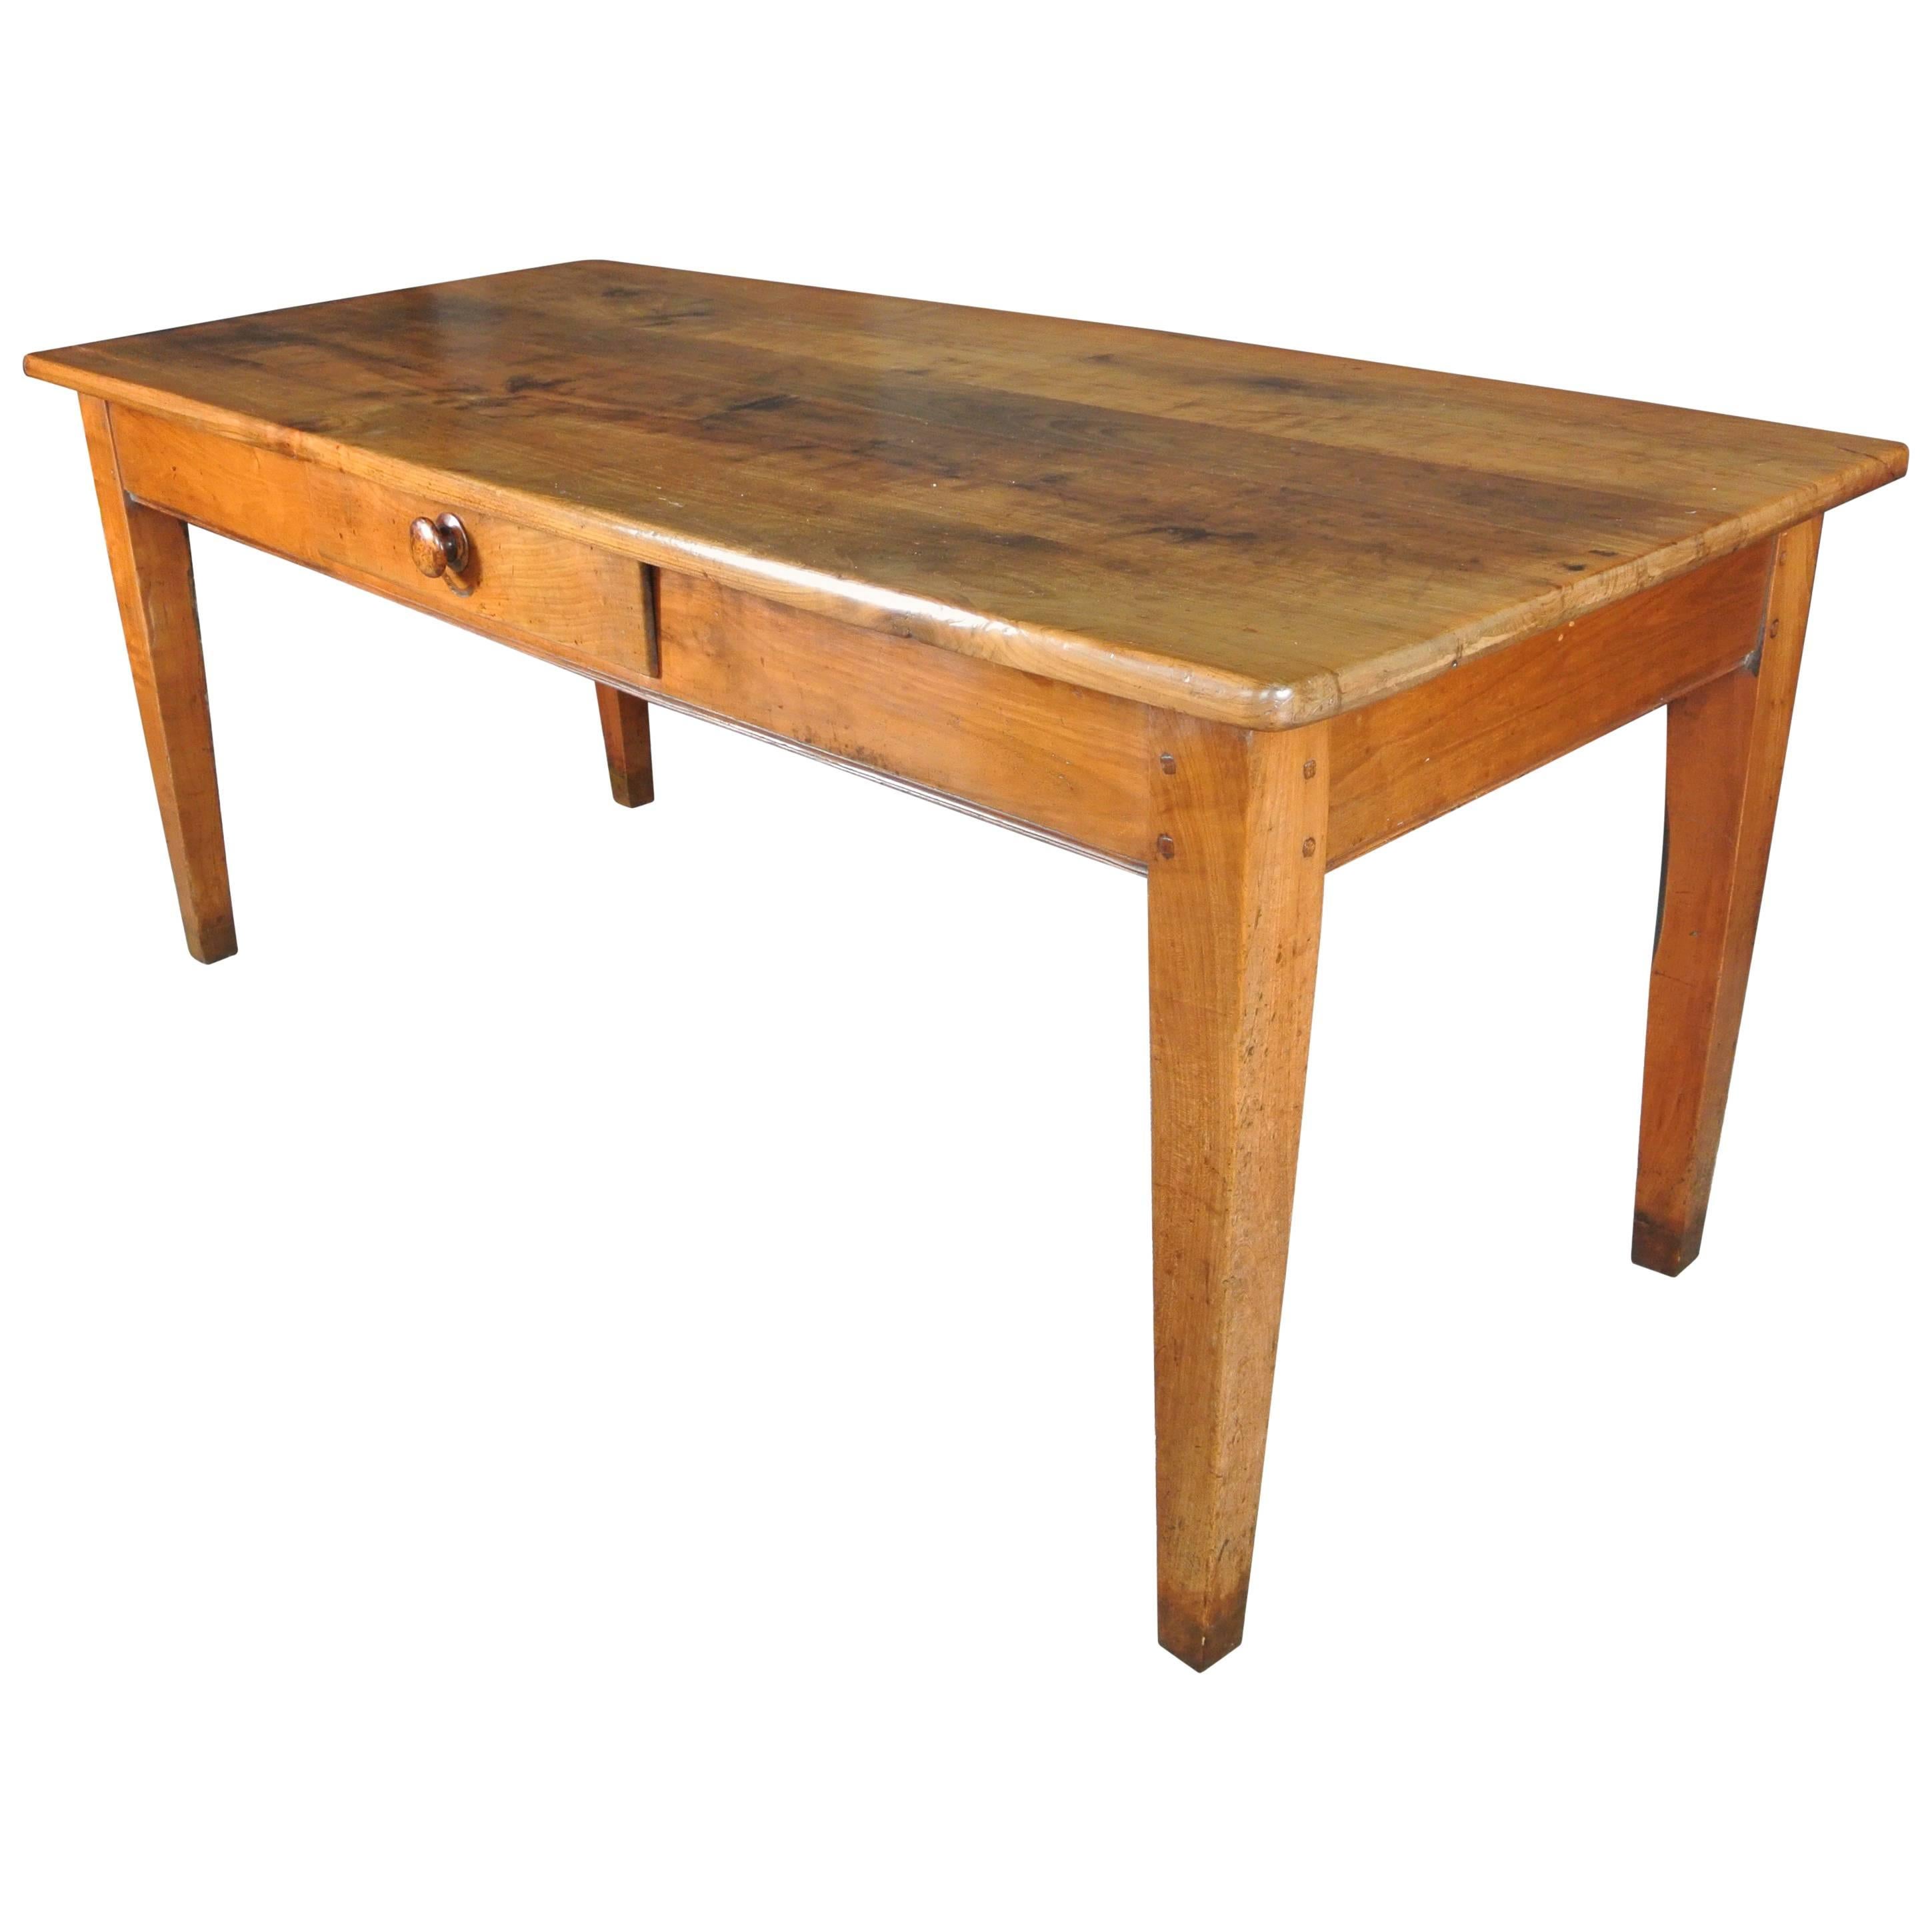 Large 19th Century, French Cherrywood Farmhouse Table